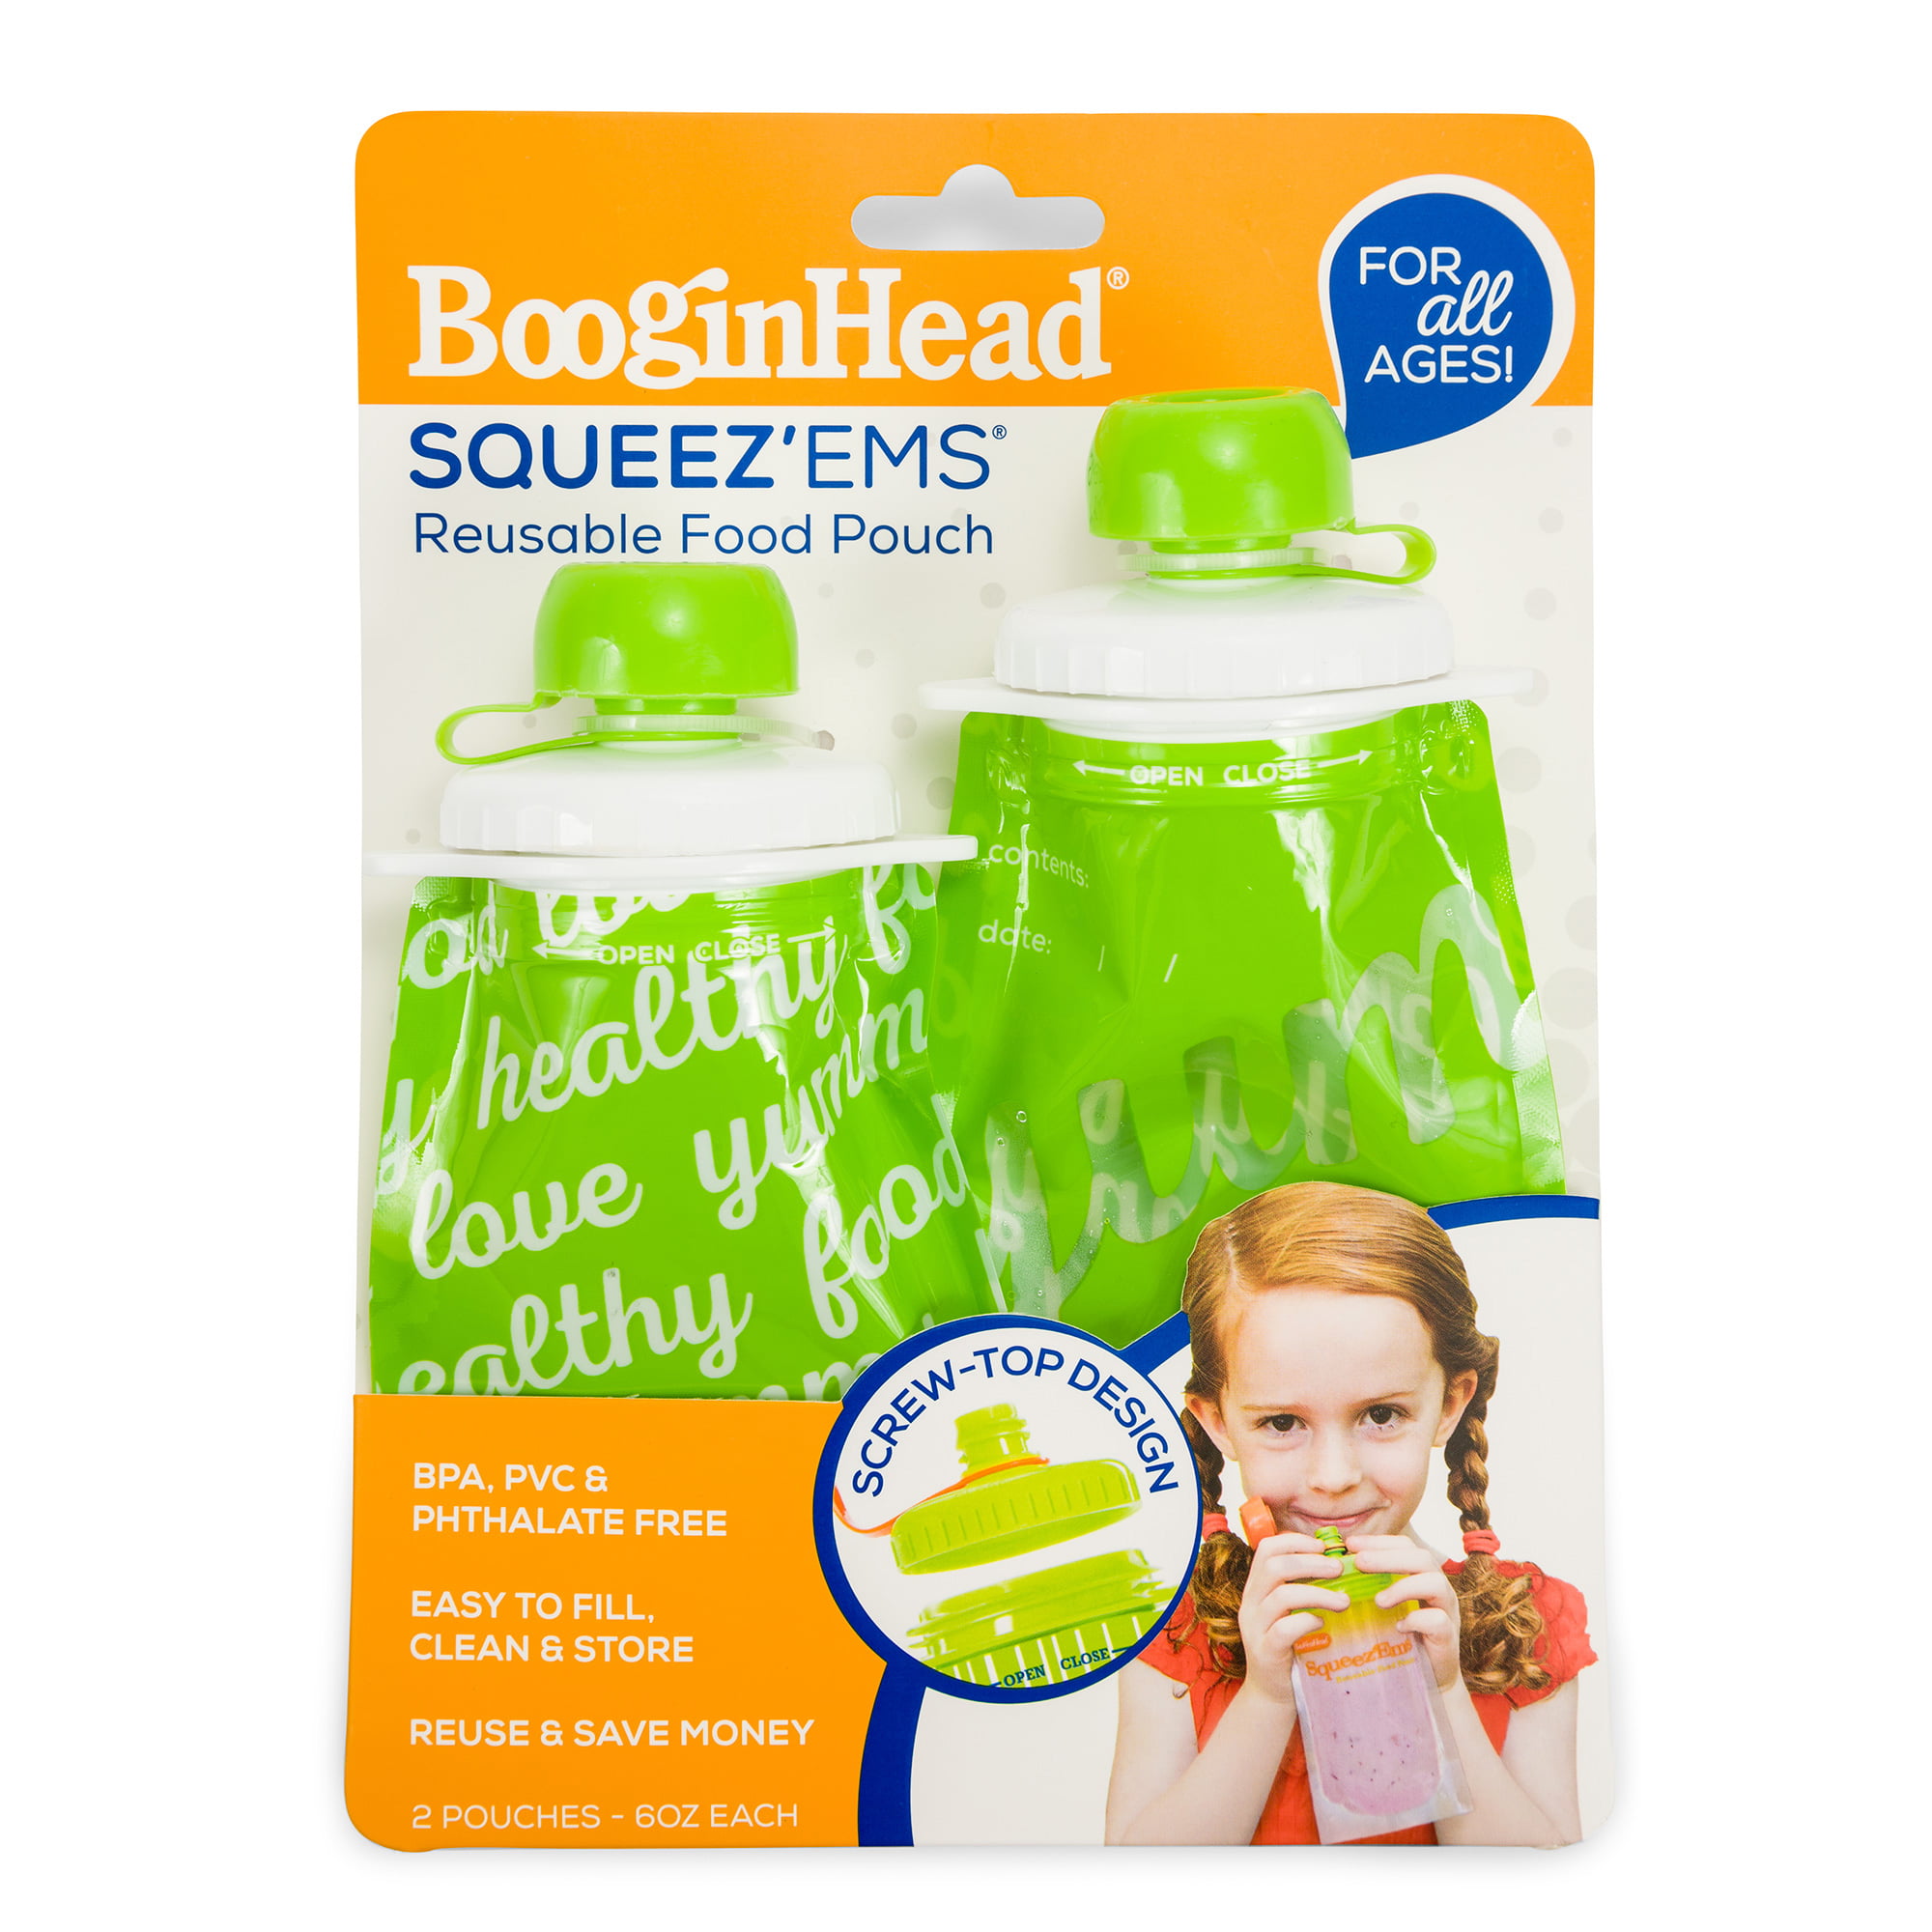 4 PACK BOOGINHEAD SQUEEZEMS TRAVEL EASY FILL SAFE BPA FREE REUSABLE FOOD POUCHES 